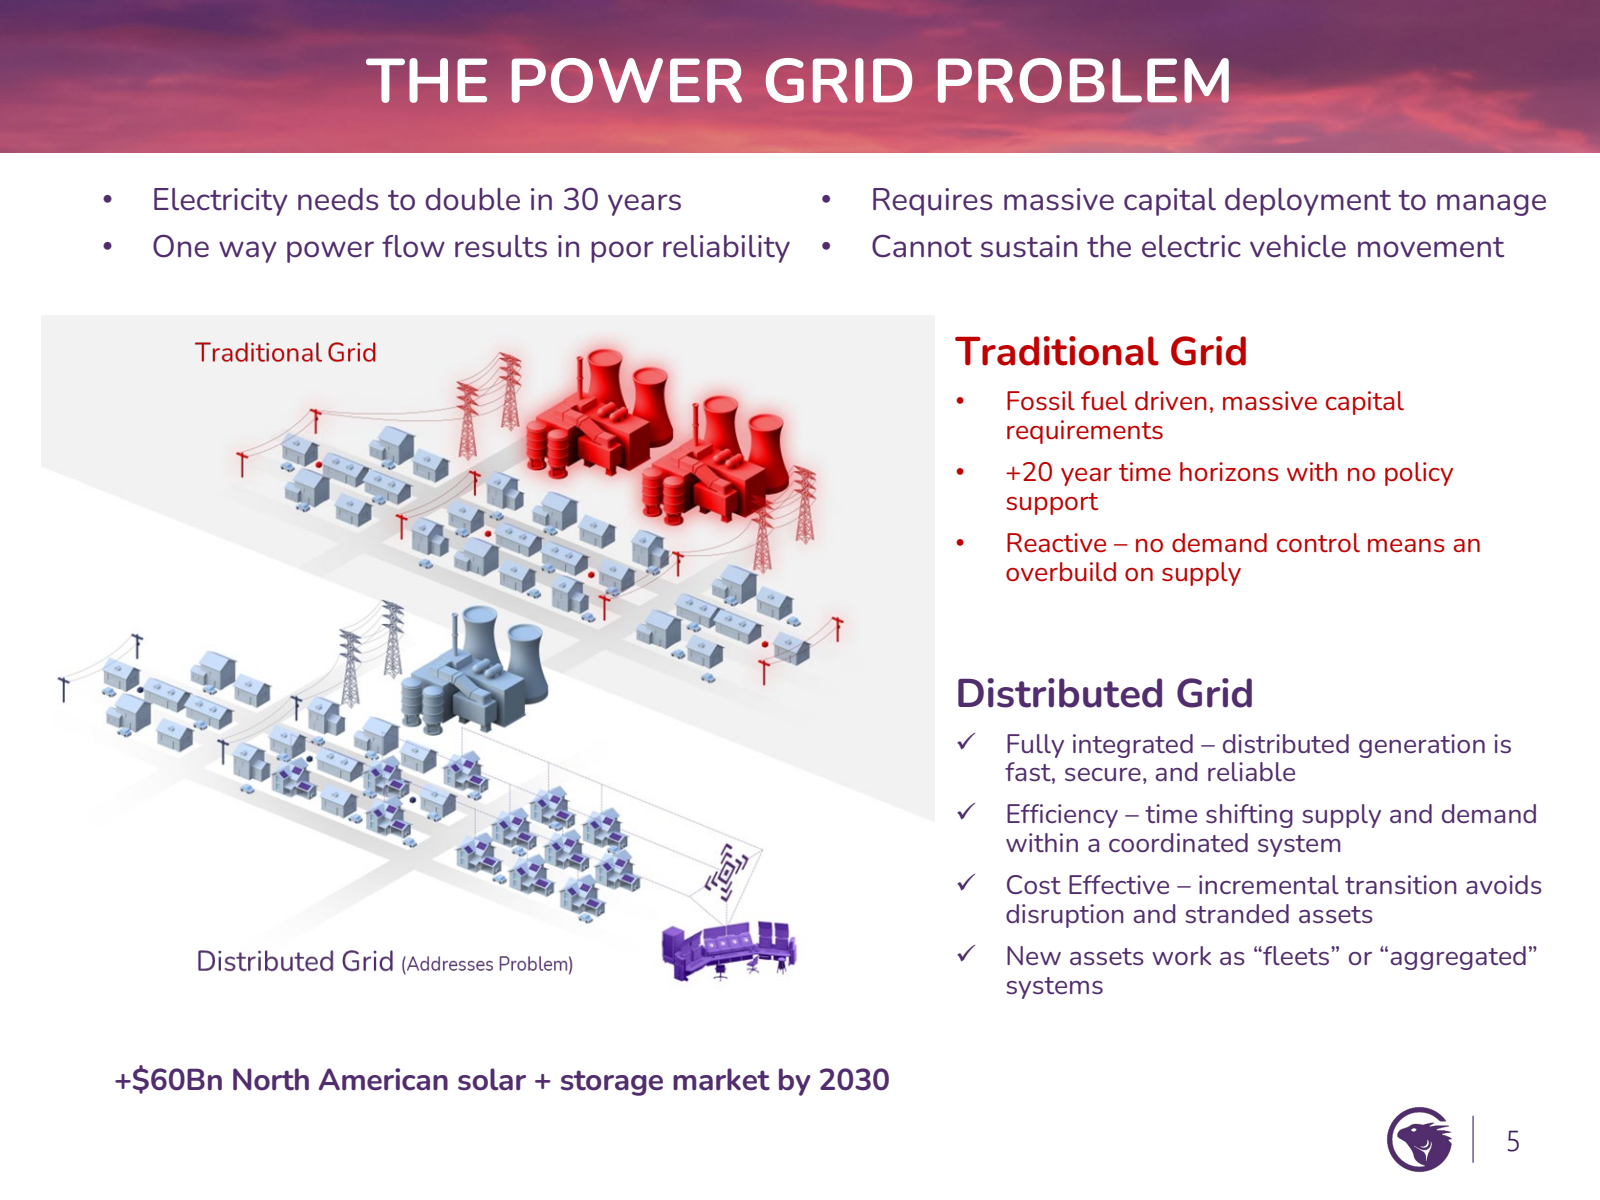 ● 

THE POWER GRID P